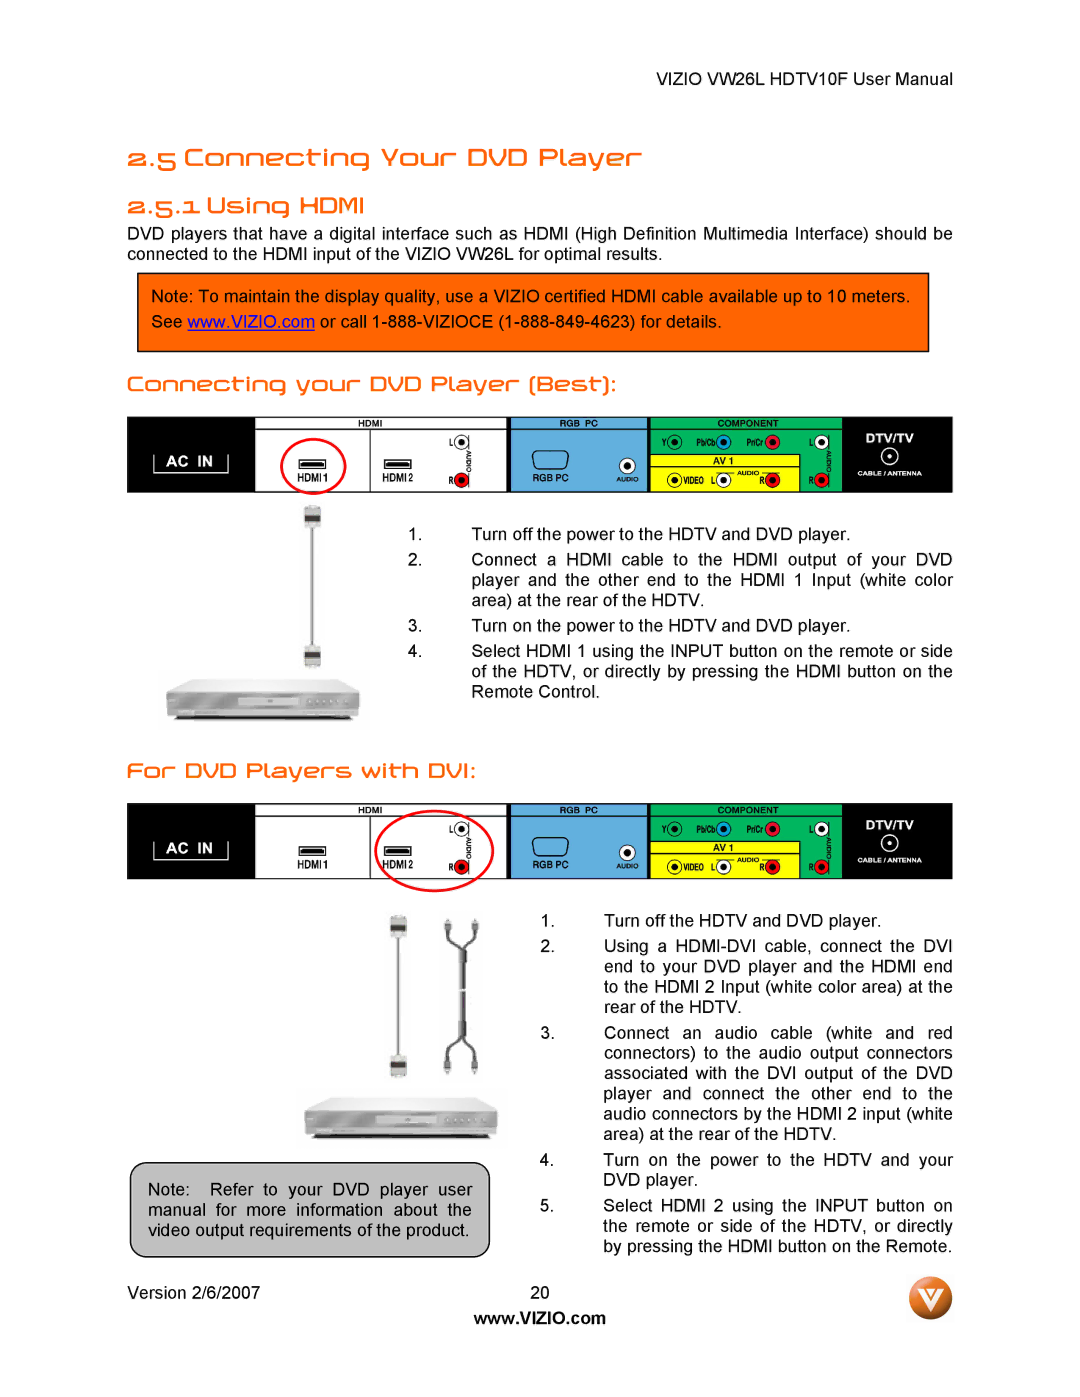 Vizio VW26L user manual Connecting Your DVD Player, Connecting your DVD Player Best, For DVD Players with DVI 